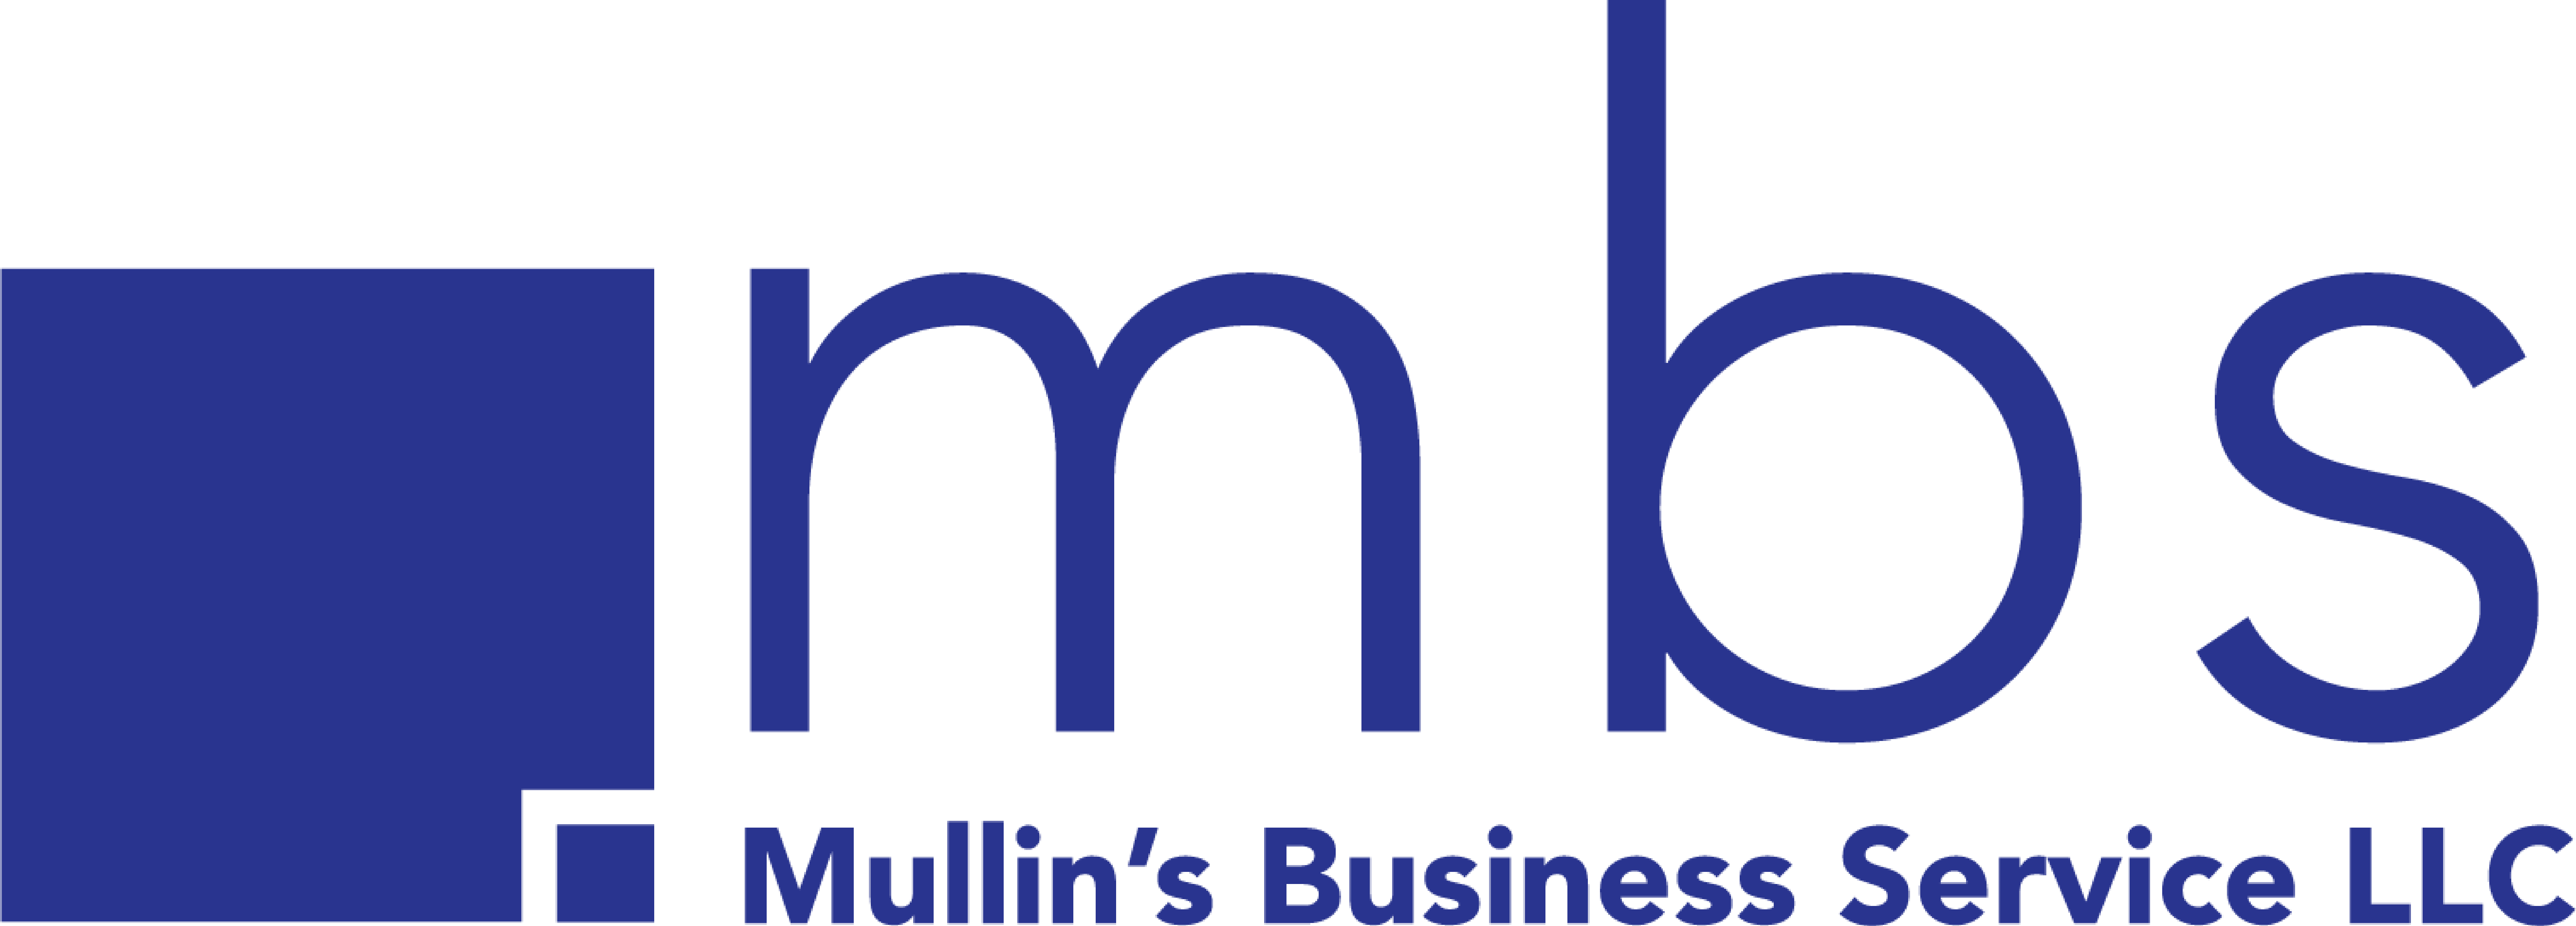 Mullin's Business Services, LLC